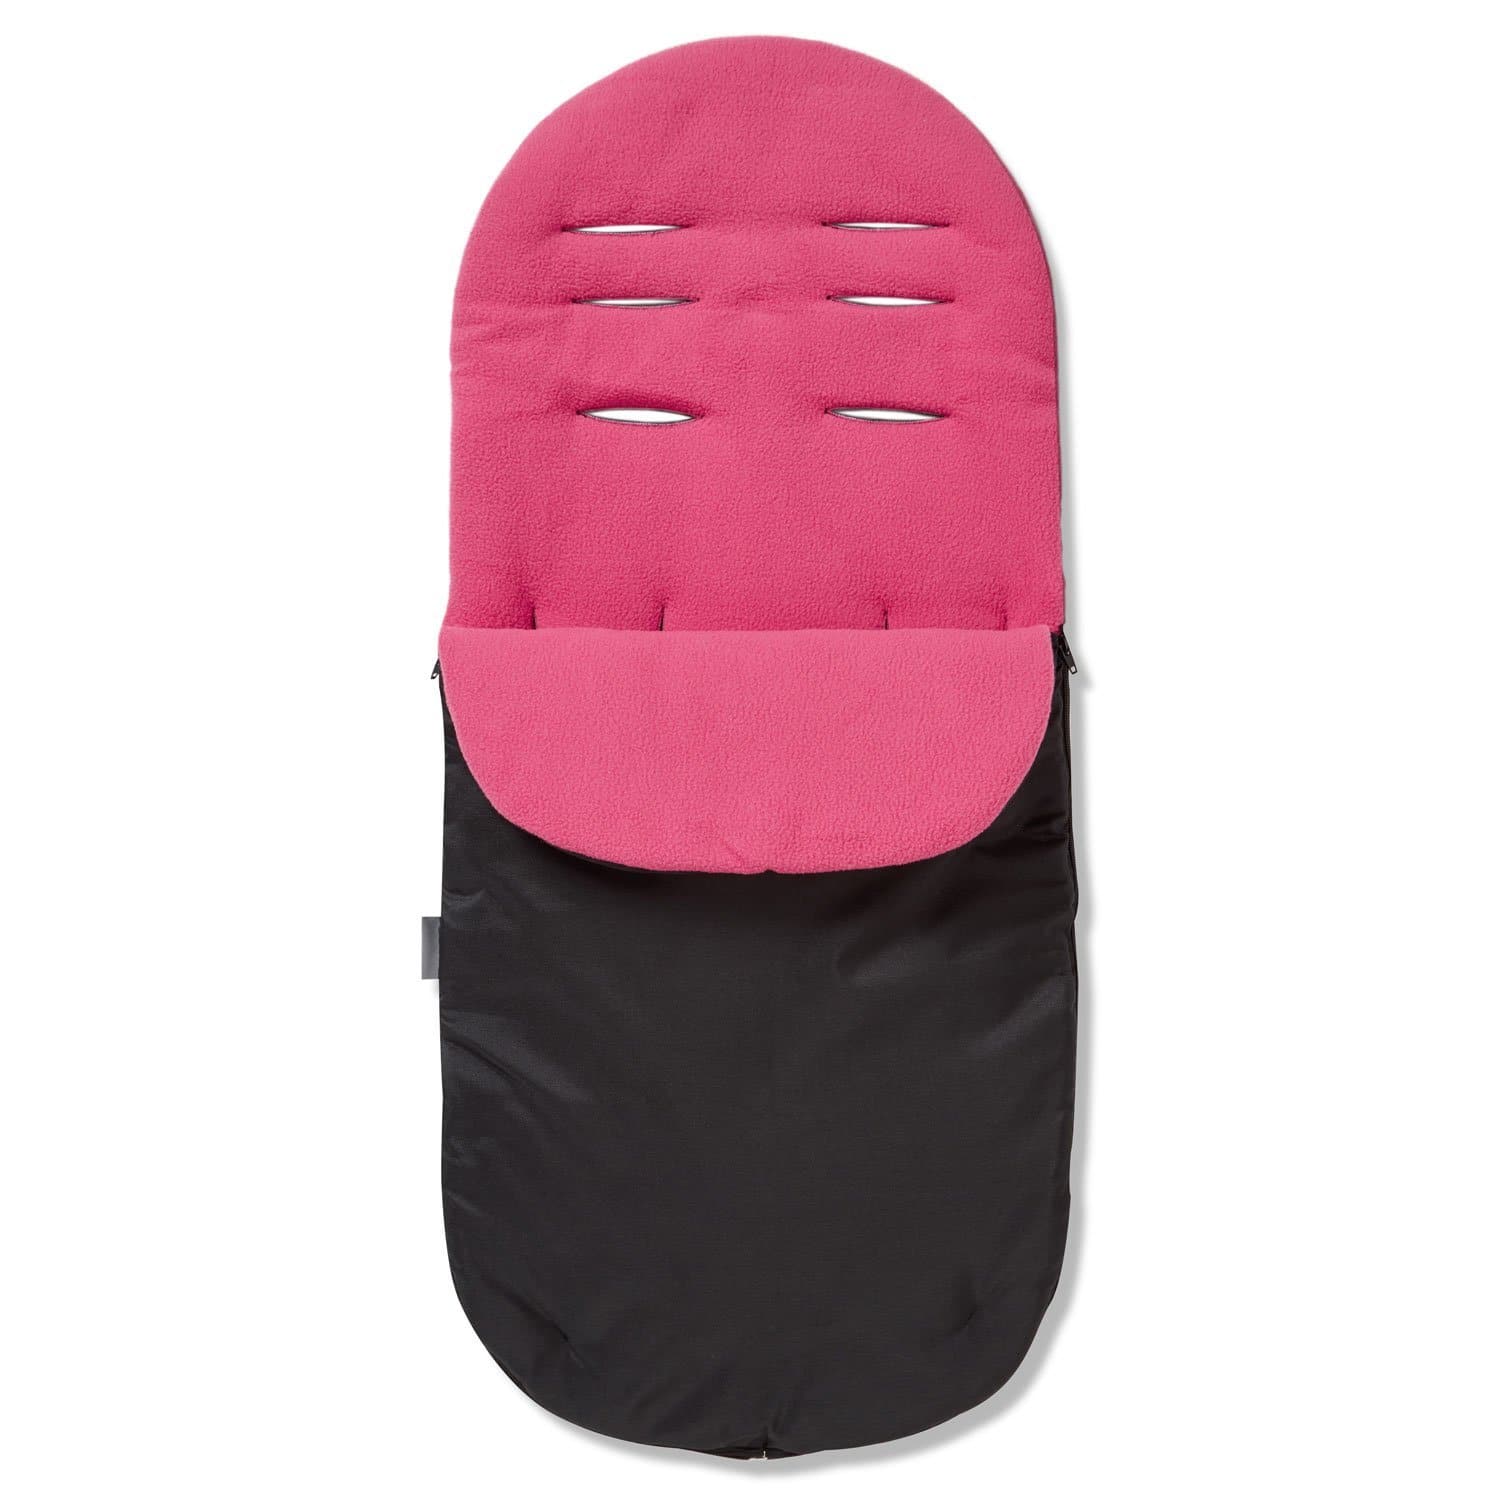 Footmuff / Cosy Toes Compatible with Hartan - Dark Pink / Fits All Models | For Your Little One